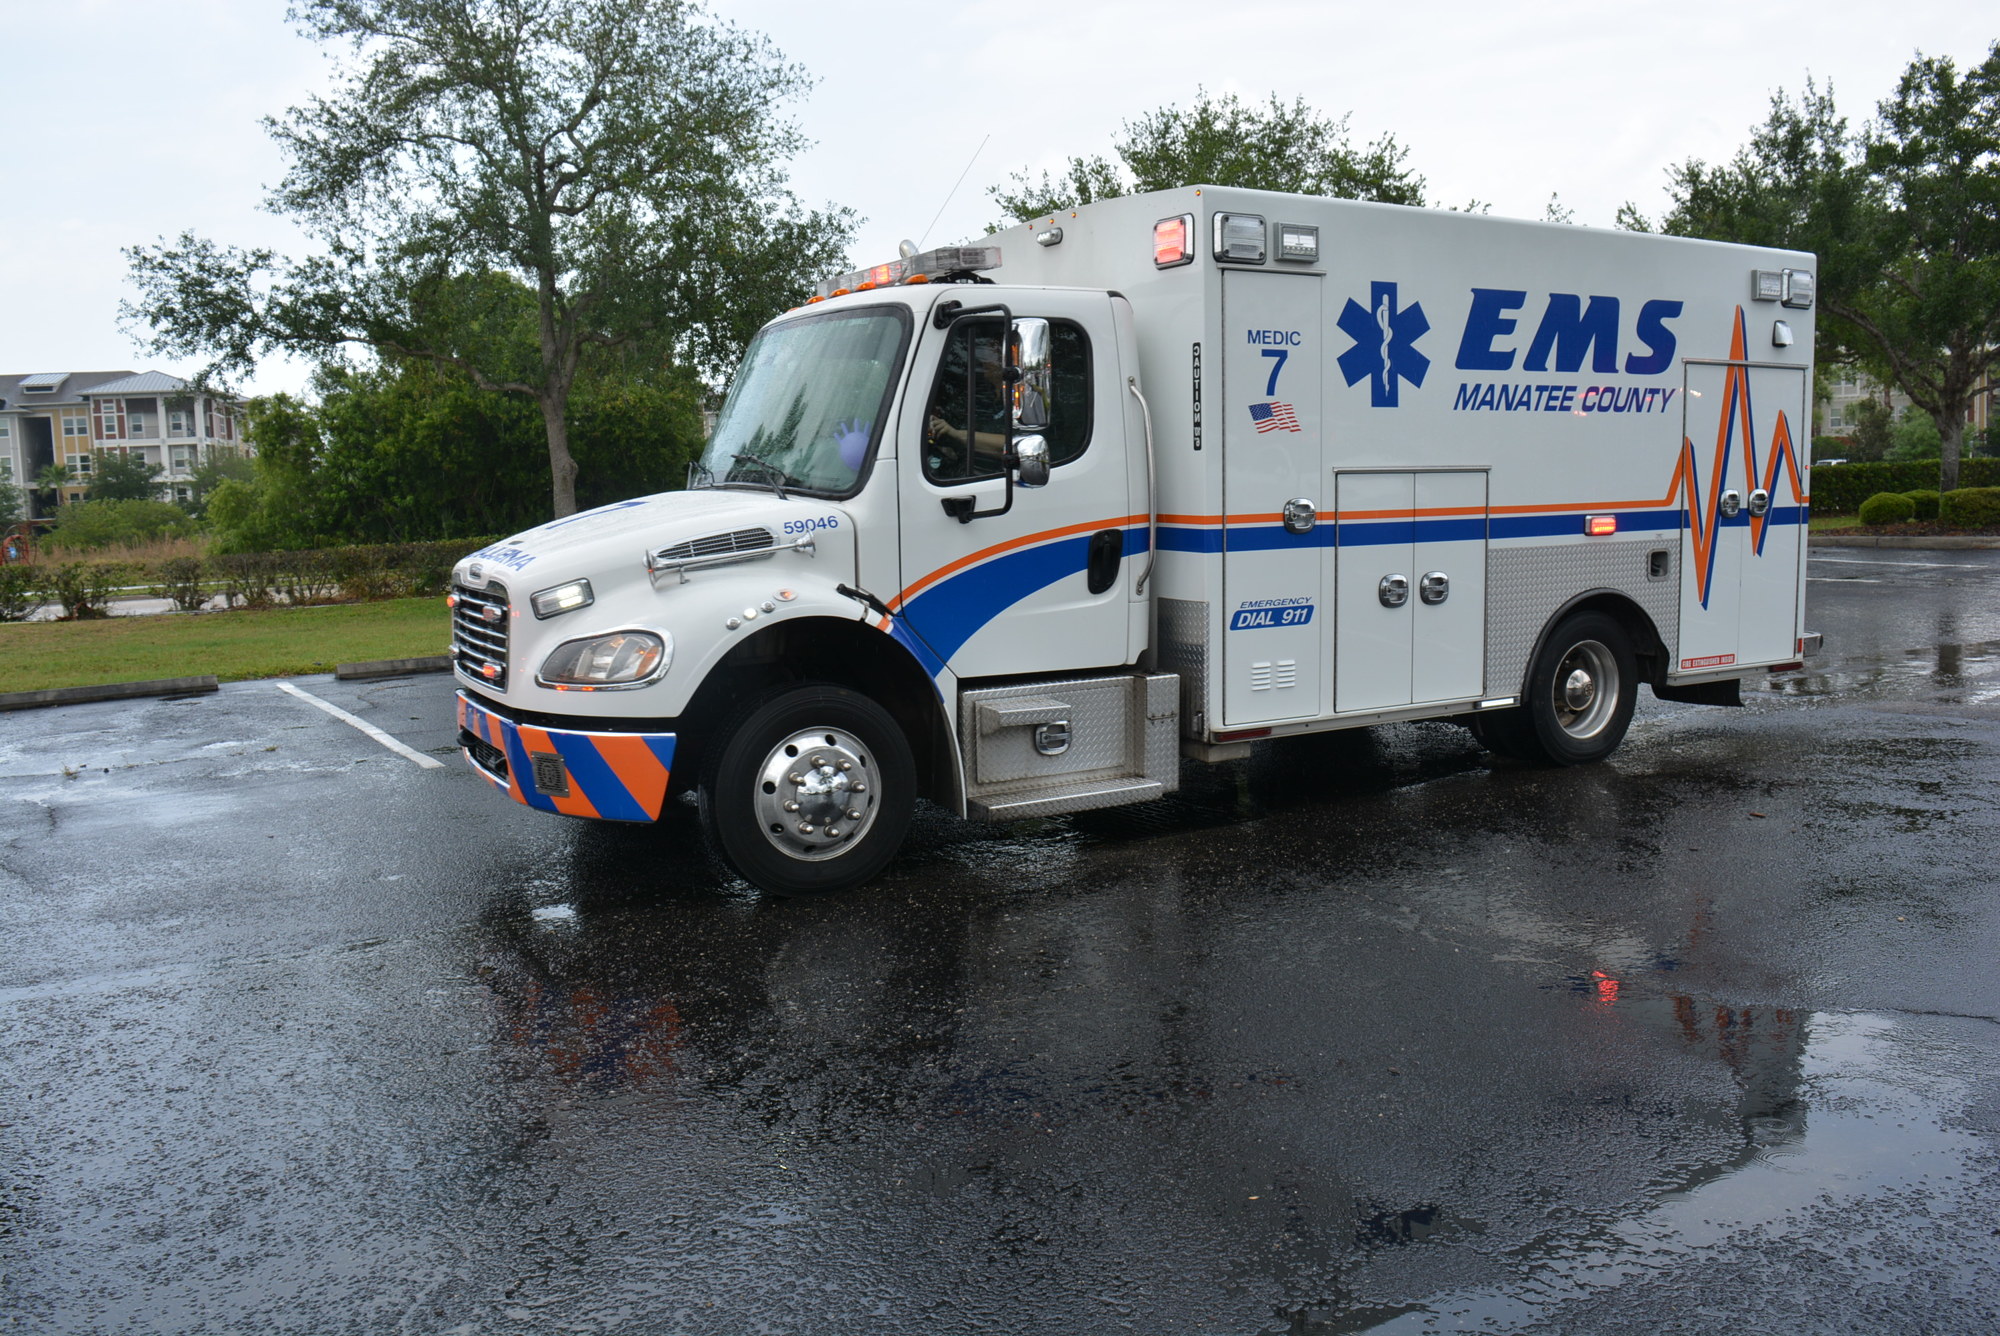 Manatee County Emergency Medical Services officials have adjusted protocols to help ensure safety of their paramedics.